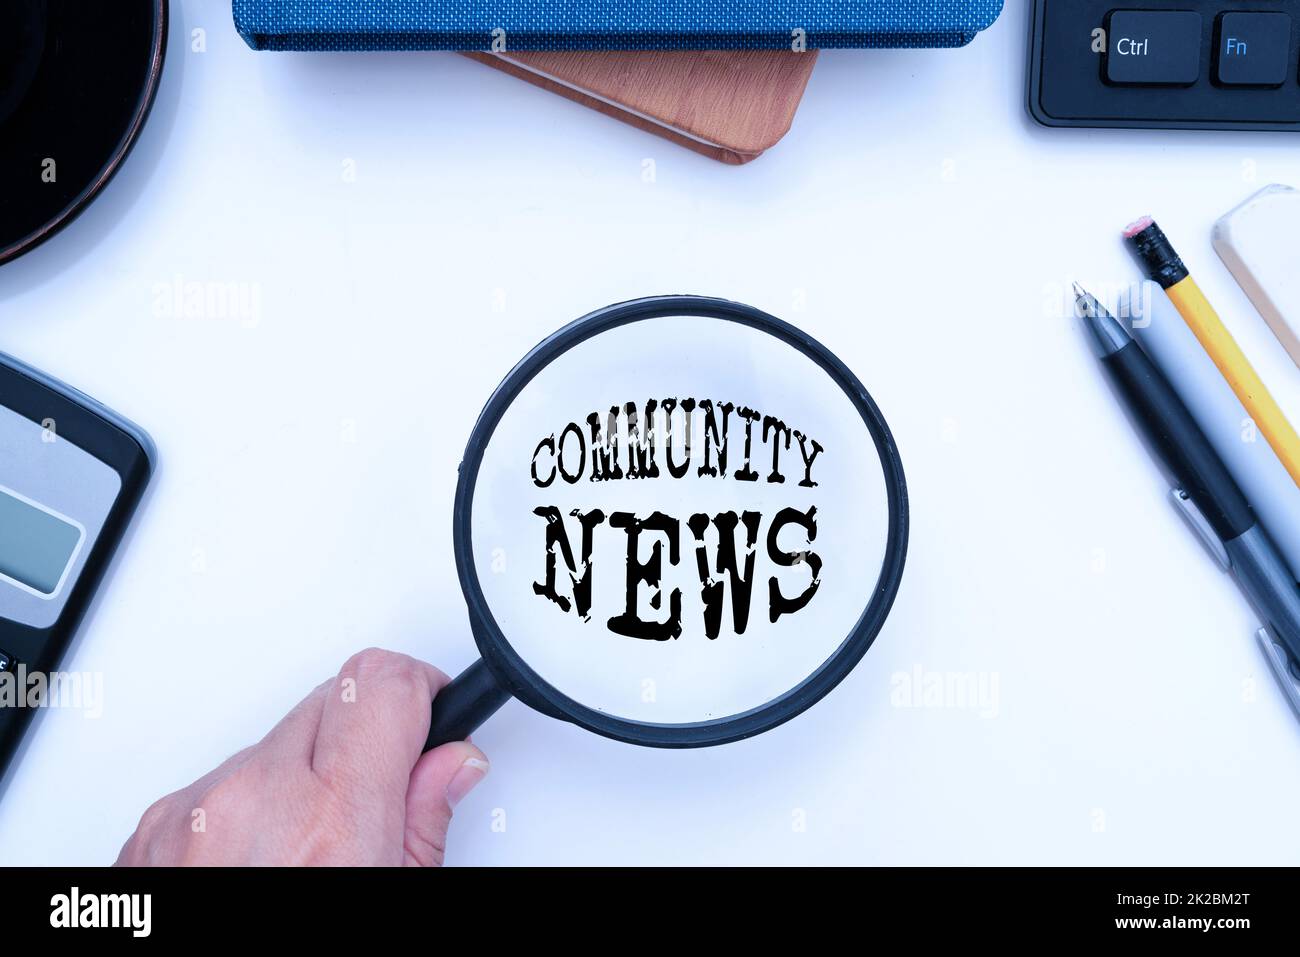 Inspiration showing sign Community News. Business idea news coverage that typically focuses on city neighborhoods Office Supplies Over Desk With Keyboard And Glasses And Coffee Cup For Working Stock Photo